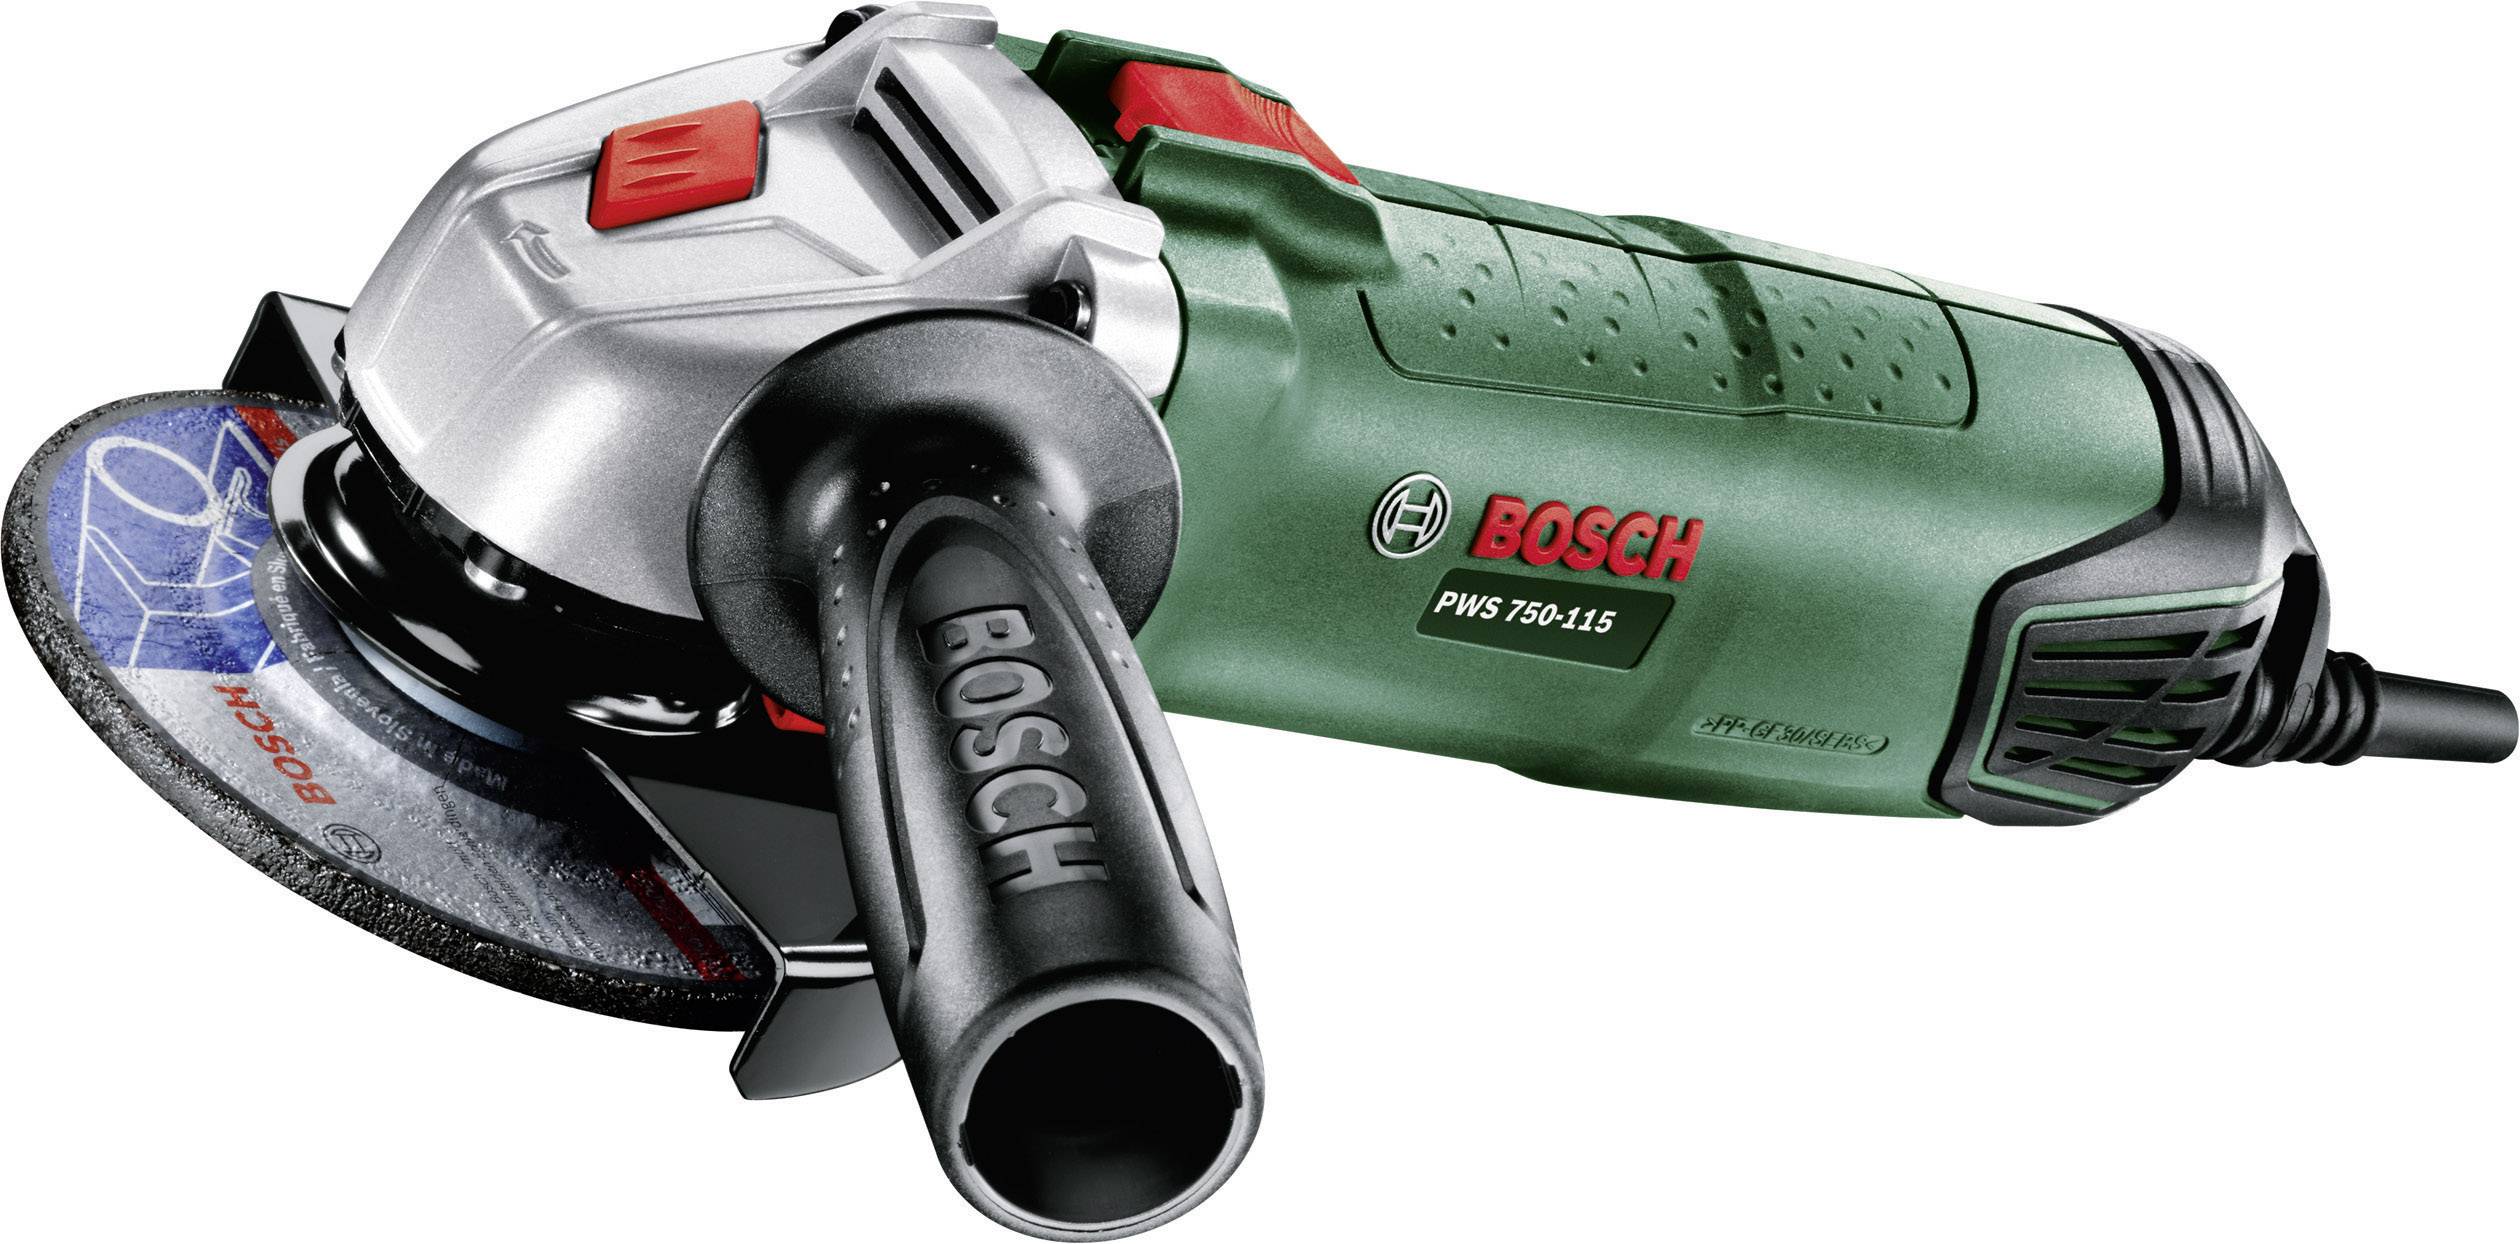 Bosch Home And Garden Pws 750 115 06033a2400 Angle Grinder 115 Mm